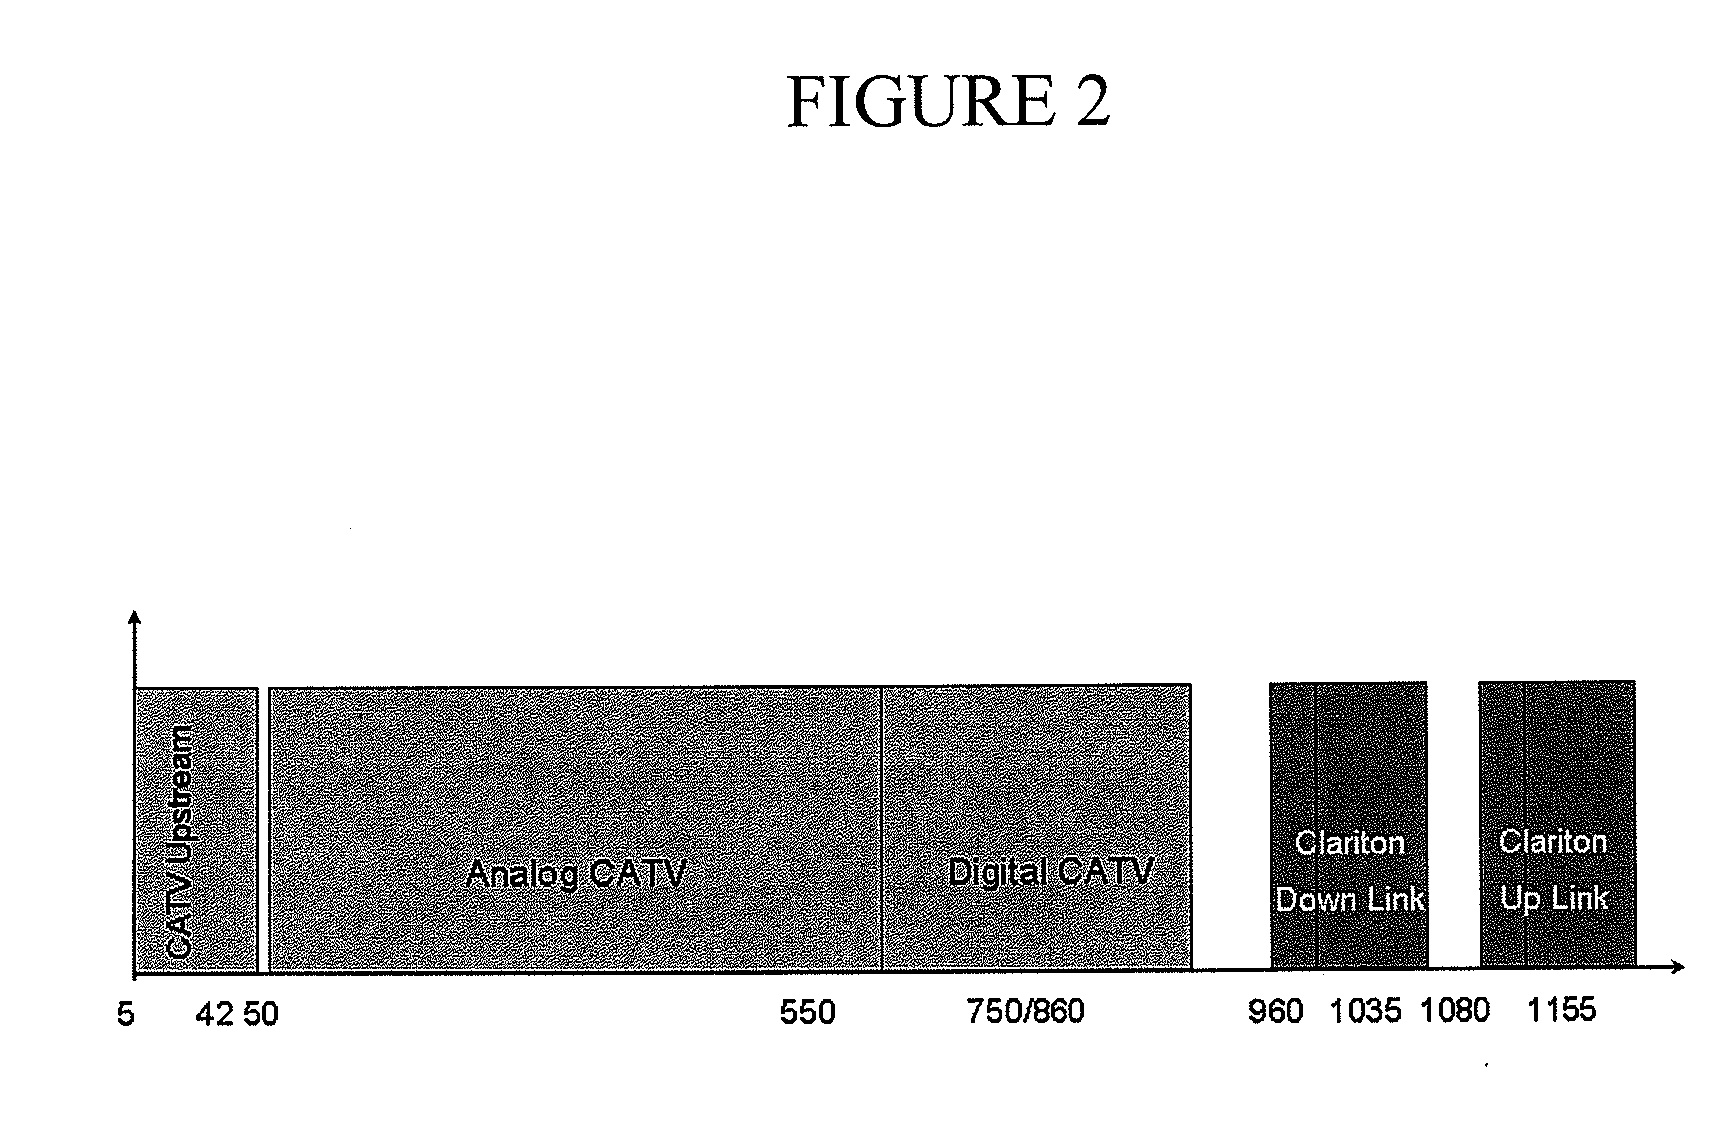 Method and apparatus for providing wireless signals over catv, dbs, PON infrastructure